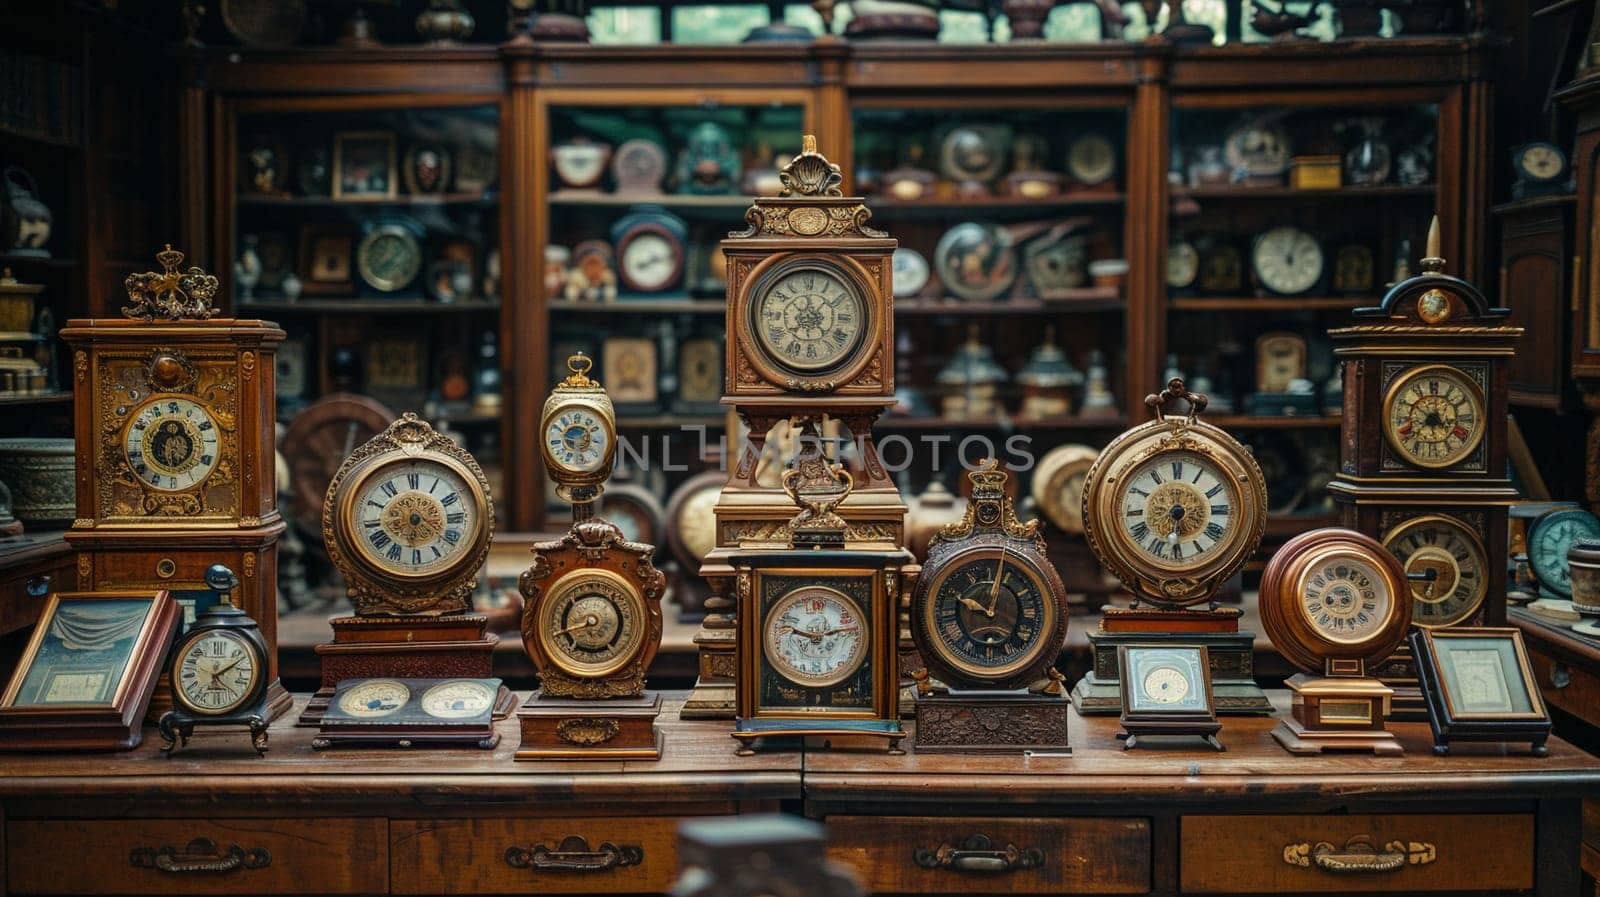 Antique Collection Unveils Historical Elegance in Business of Time-Honored Treasures, Antique clocks and collectible curios unveil a story of historical elegance and time-honored treasures in the antique collection business.